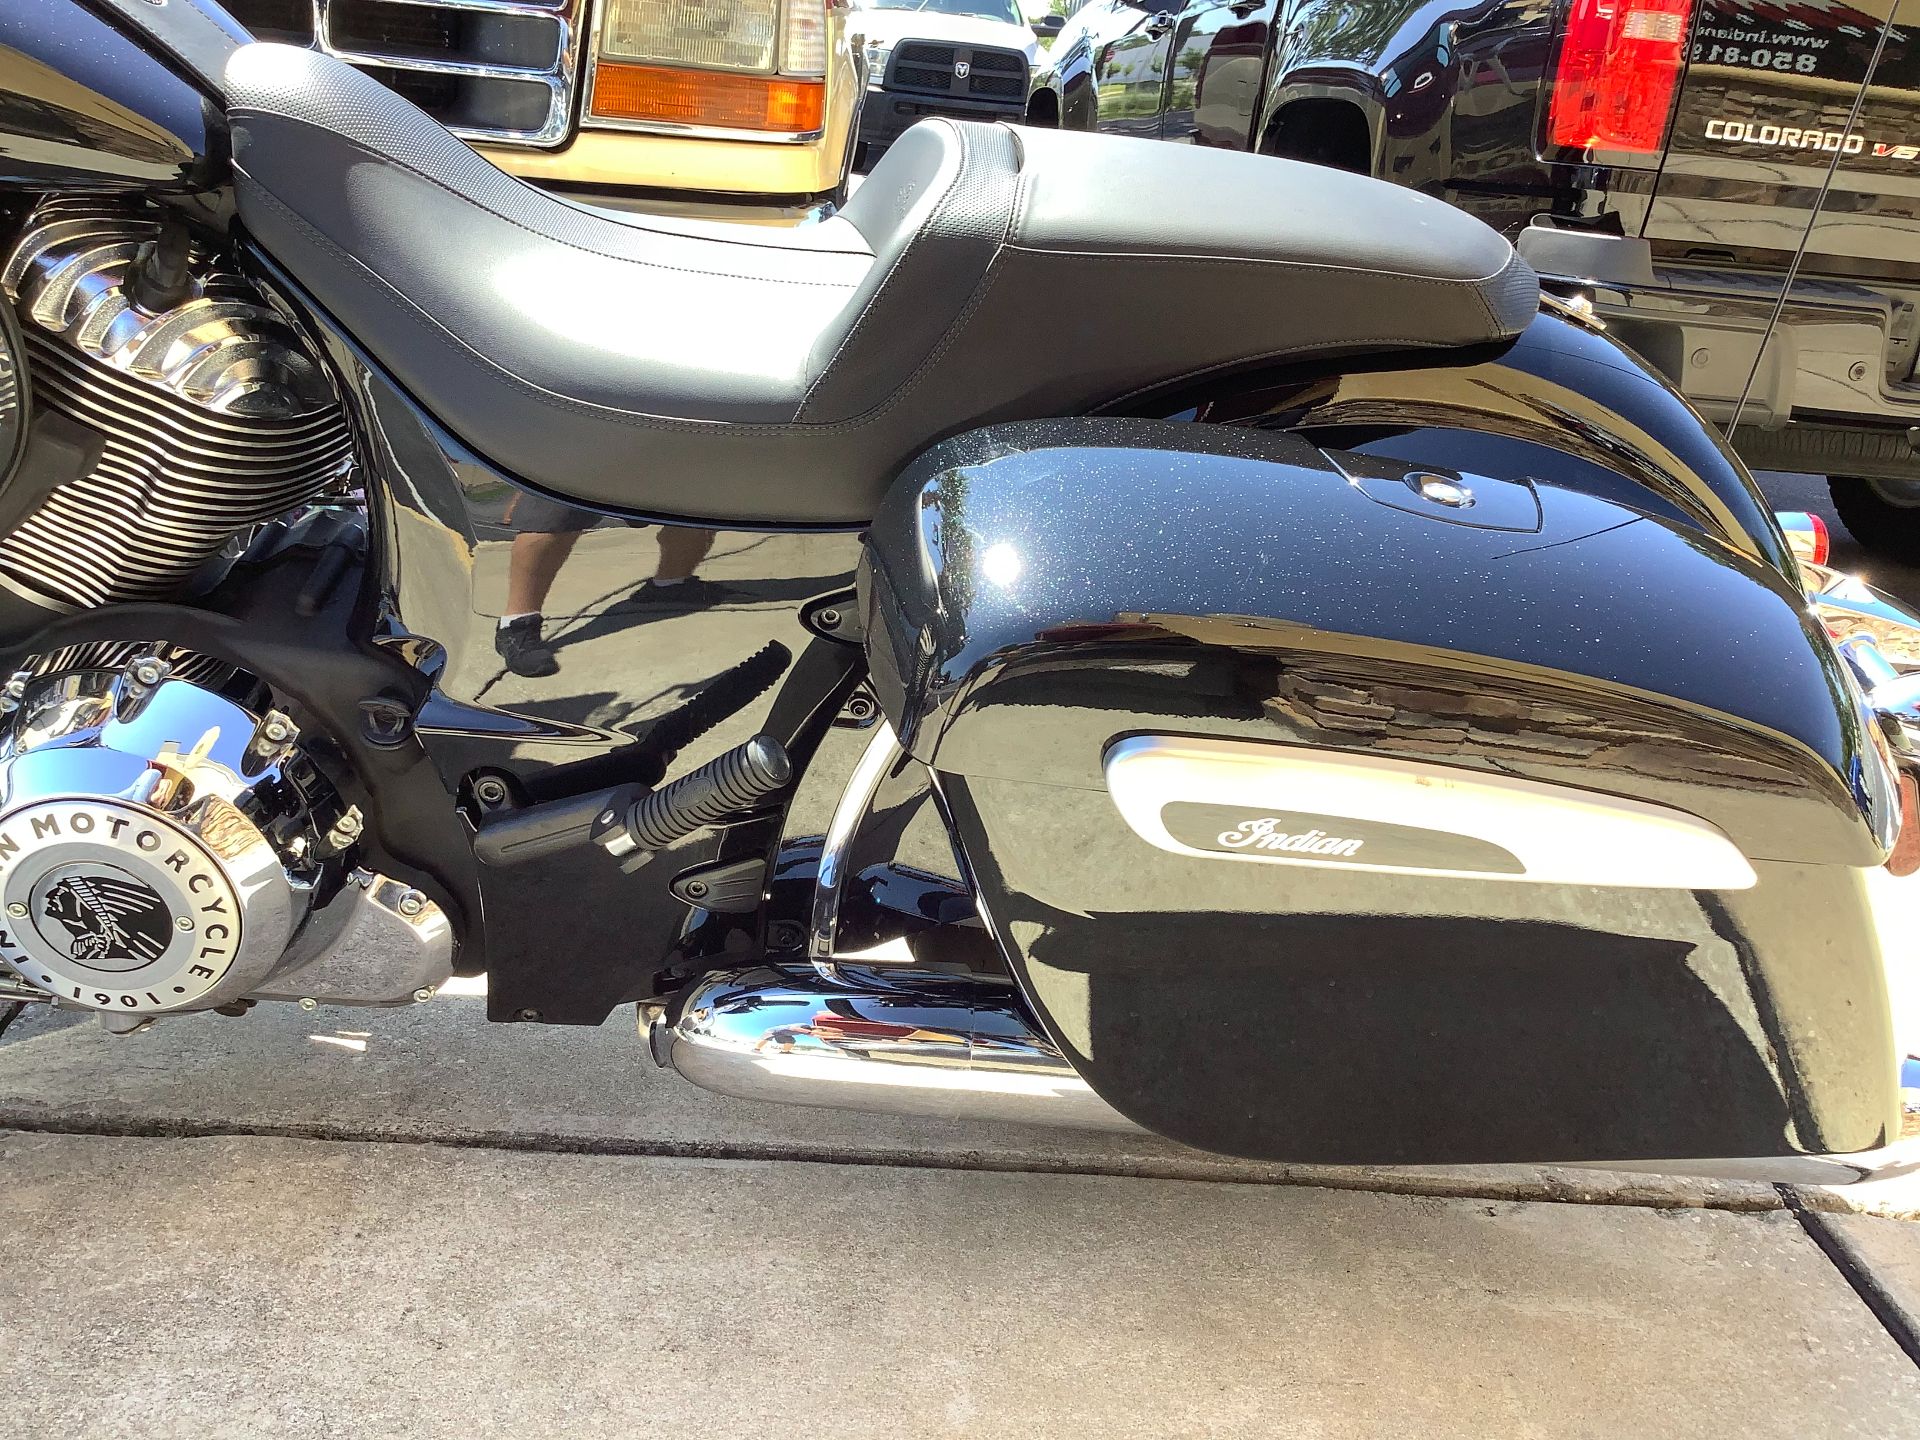 2021 Indian CHIEFTAIN LIMITED in Panama City Beach, Florida - Photo 9